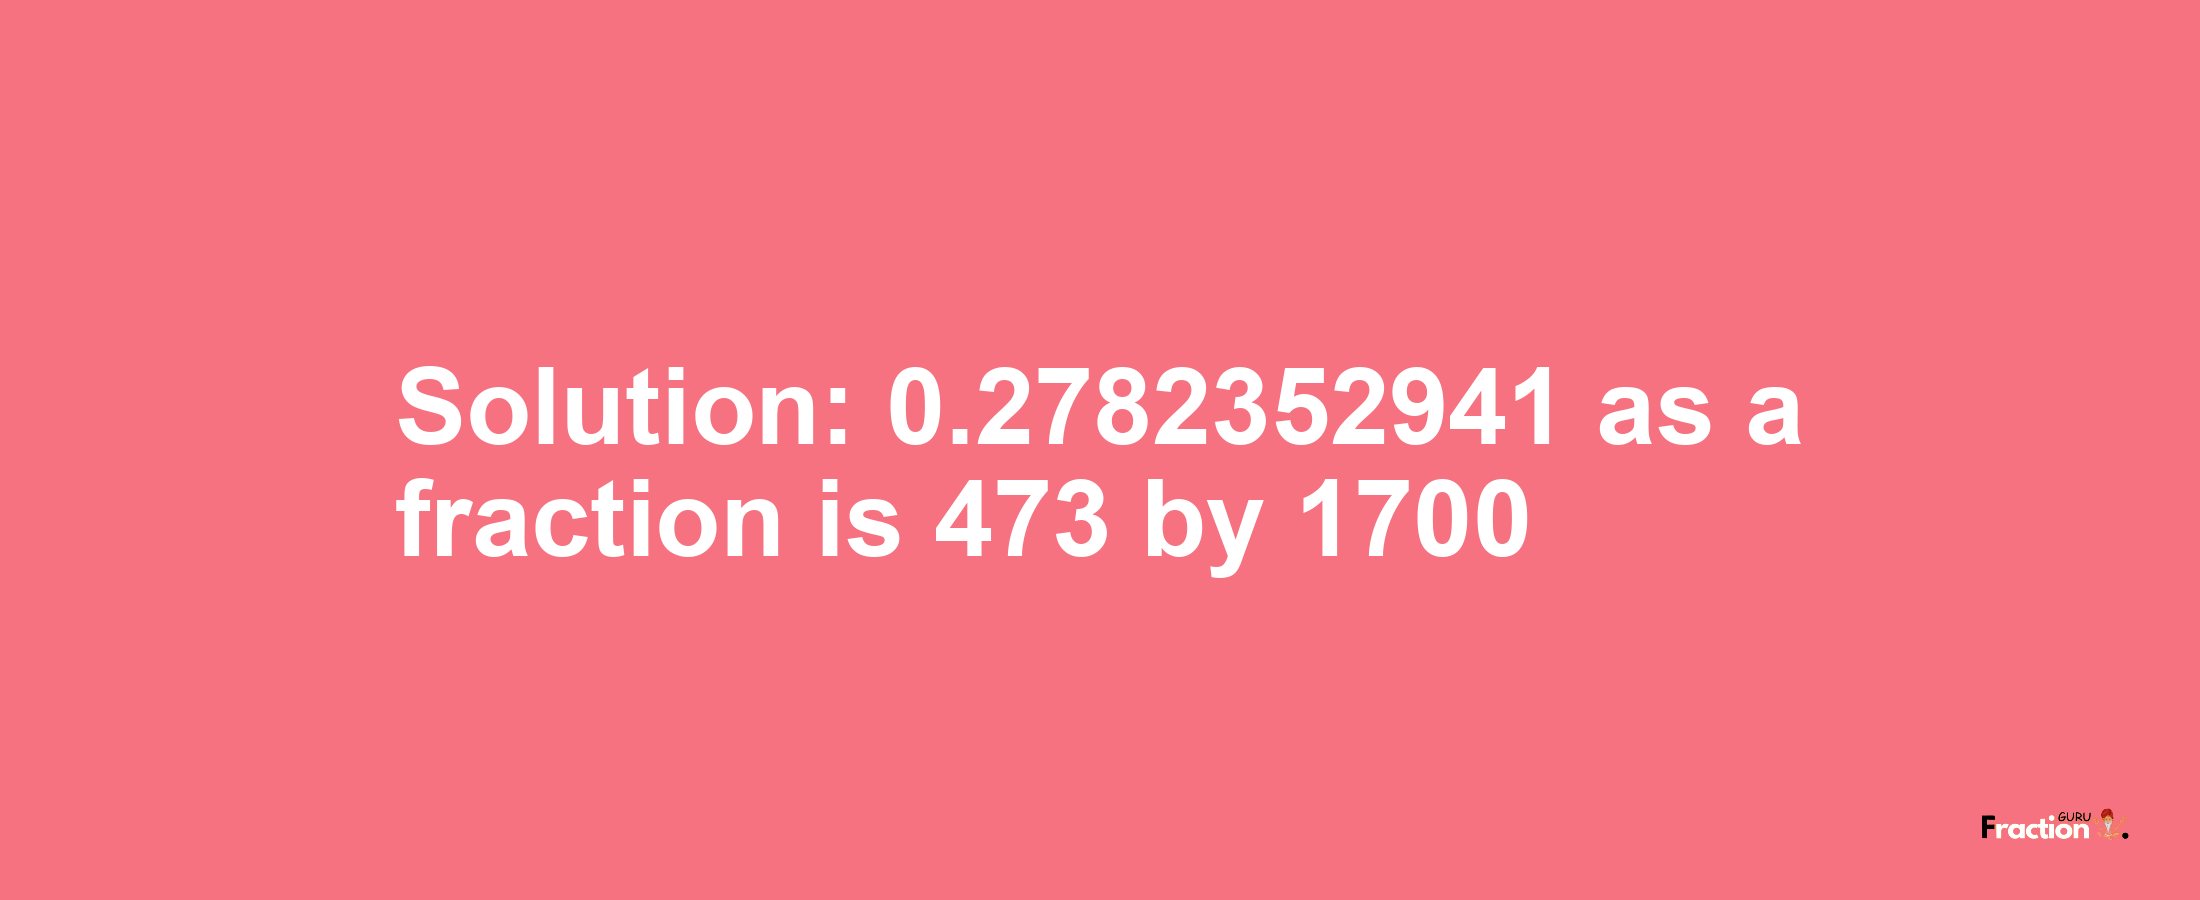 Solution:0.2782352941 as a fraction is 473/1700